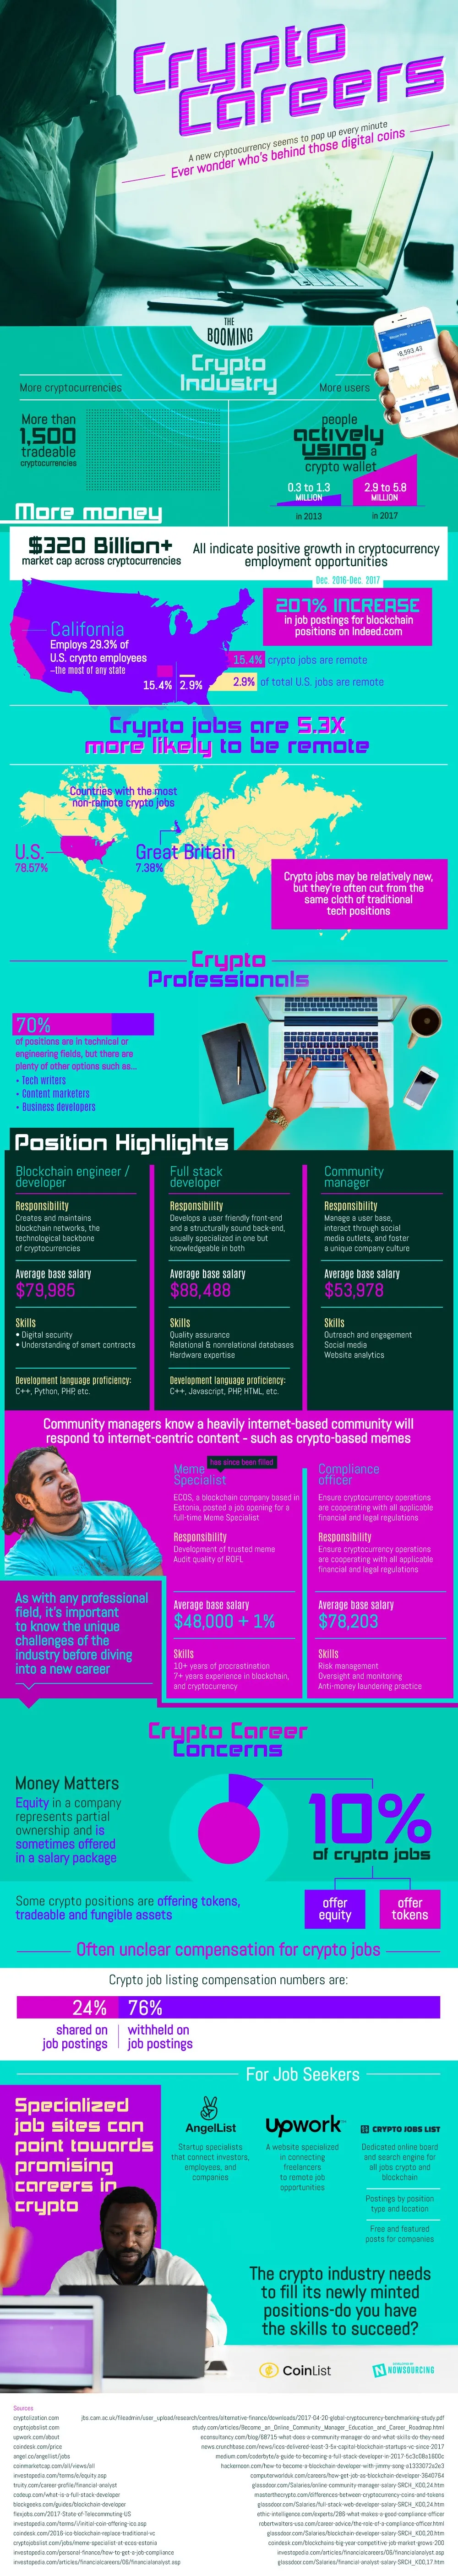 Crypto Careers – Cryptocurrencies Helping the Jobs Market - #infographic